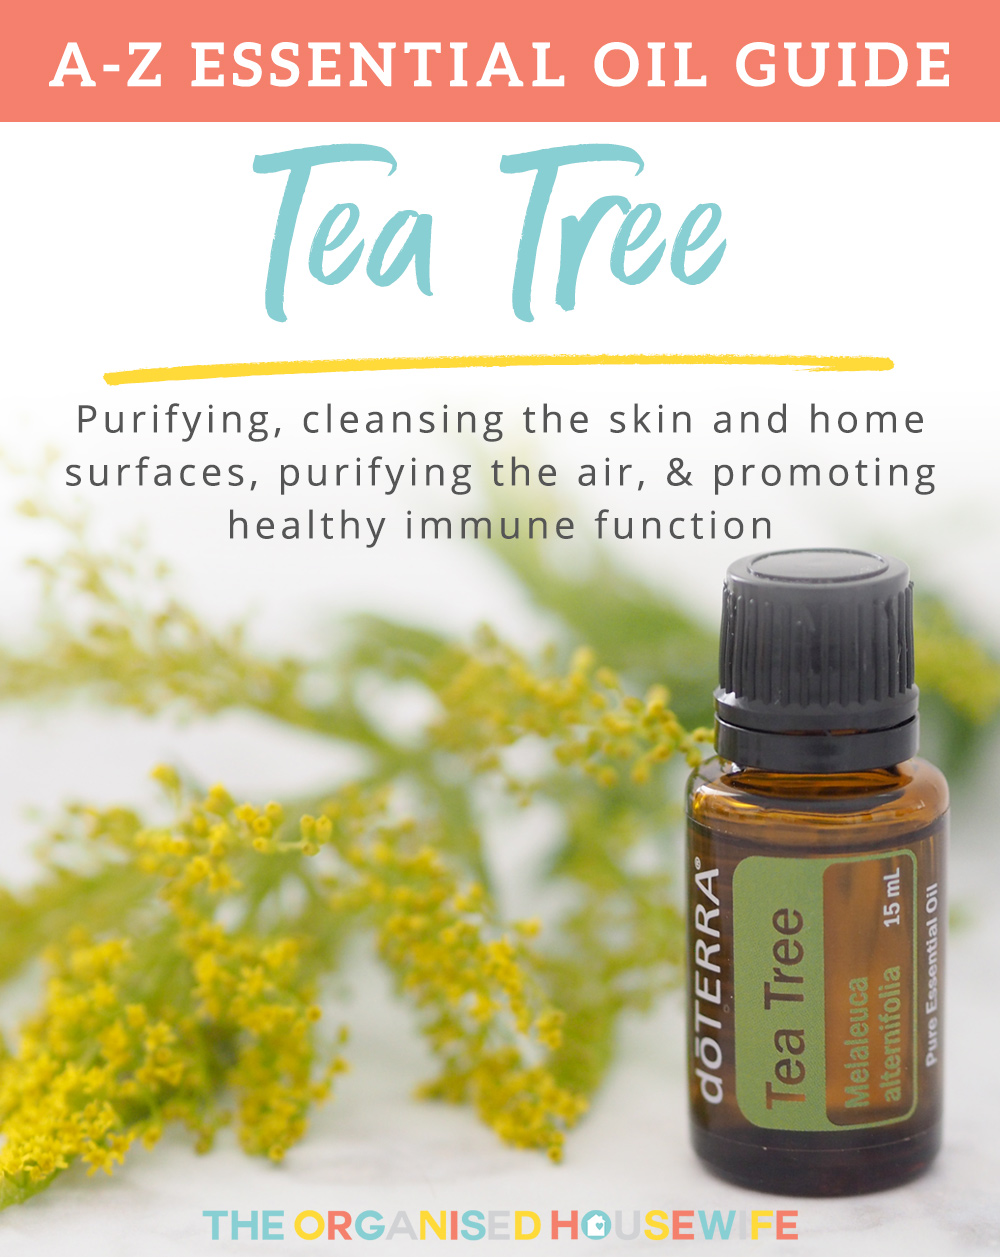 Tea Tree Essential Oil, is best known for its purifying qualities, which make it useful for cleansing the skin and home surfaces, purifying the air, or promoting healthy immune function.